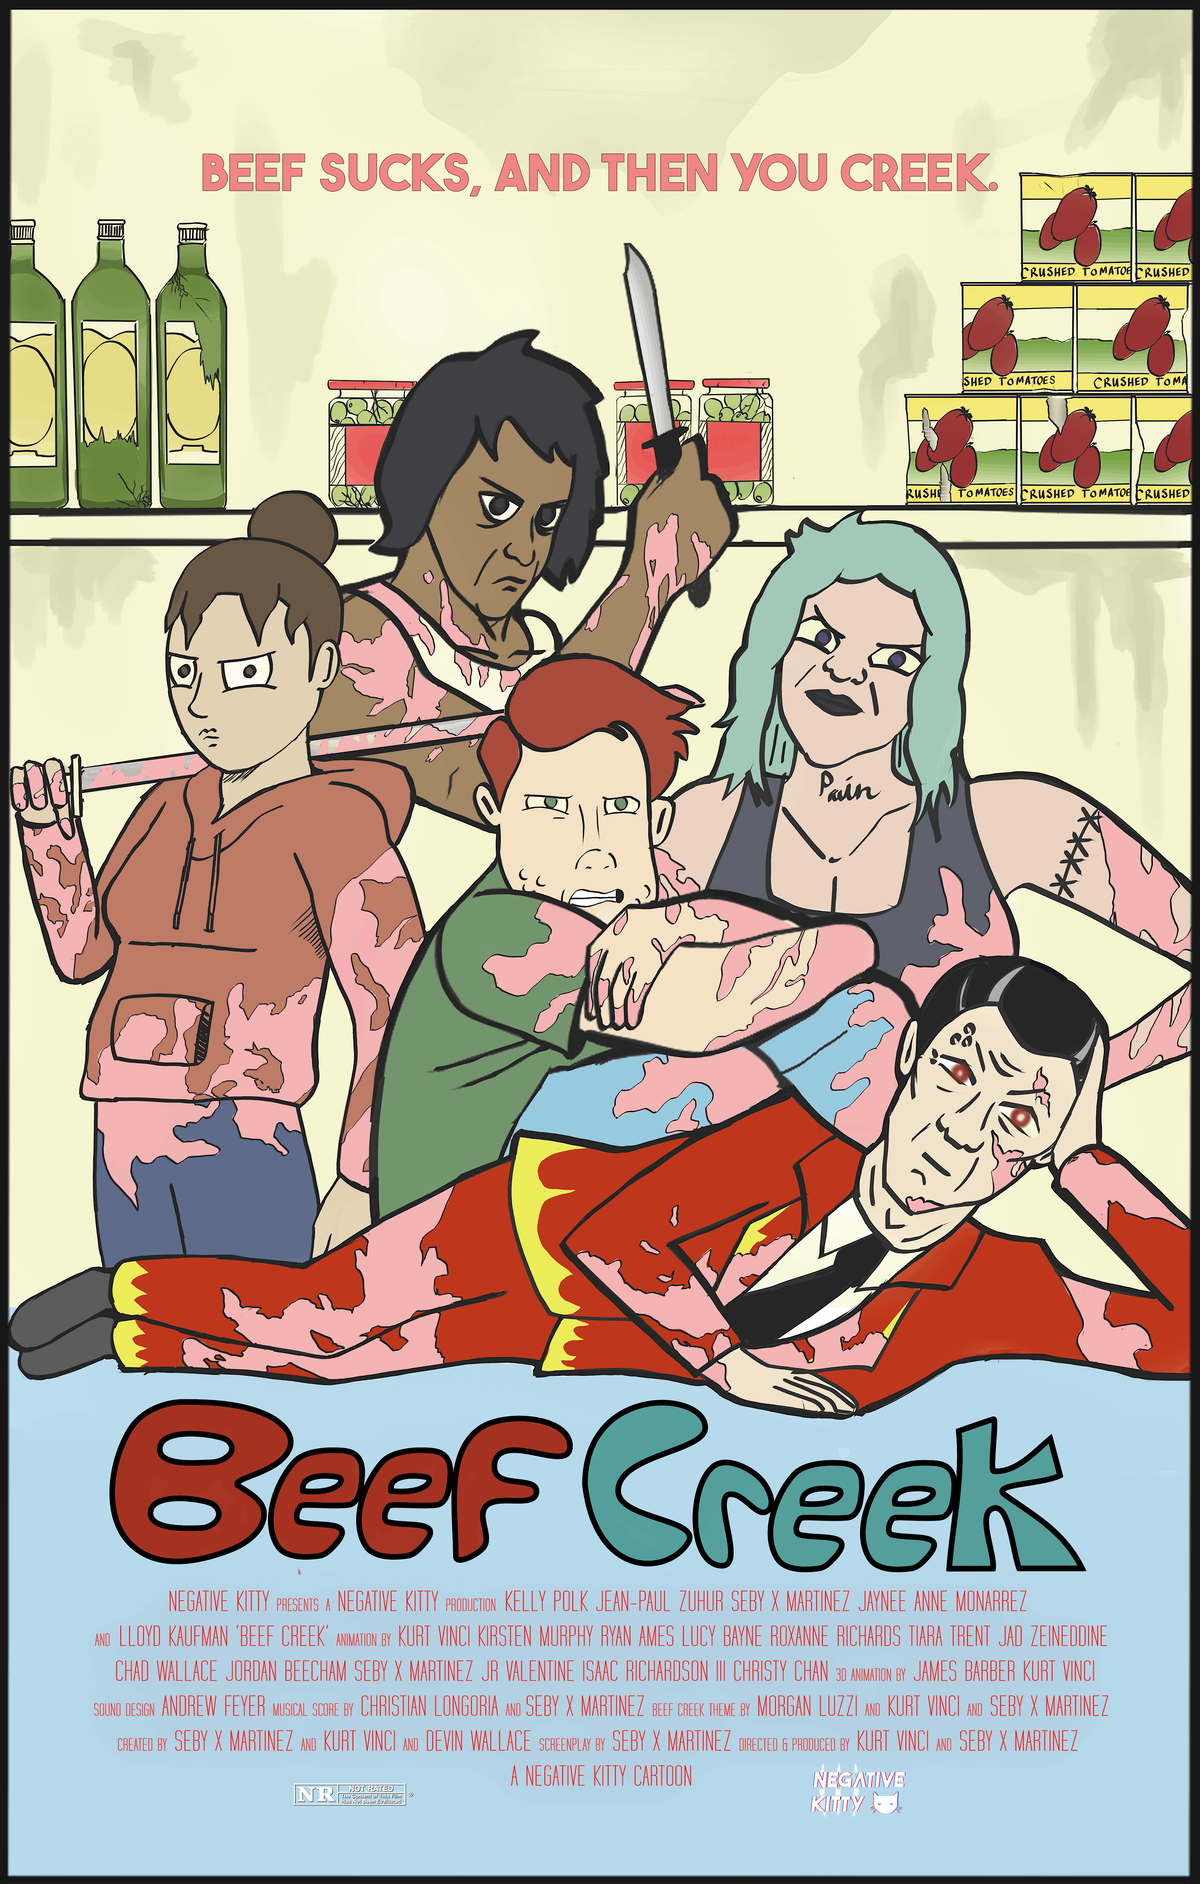 NEGATIVE KITTY PRESENTS: BEEF CREEK!!! An Exclusive Preview Event